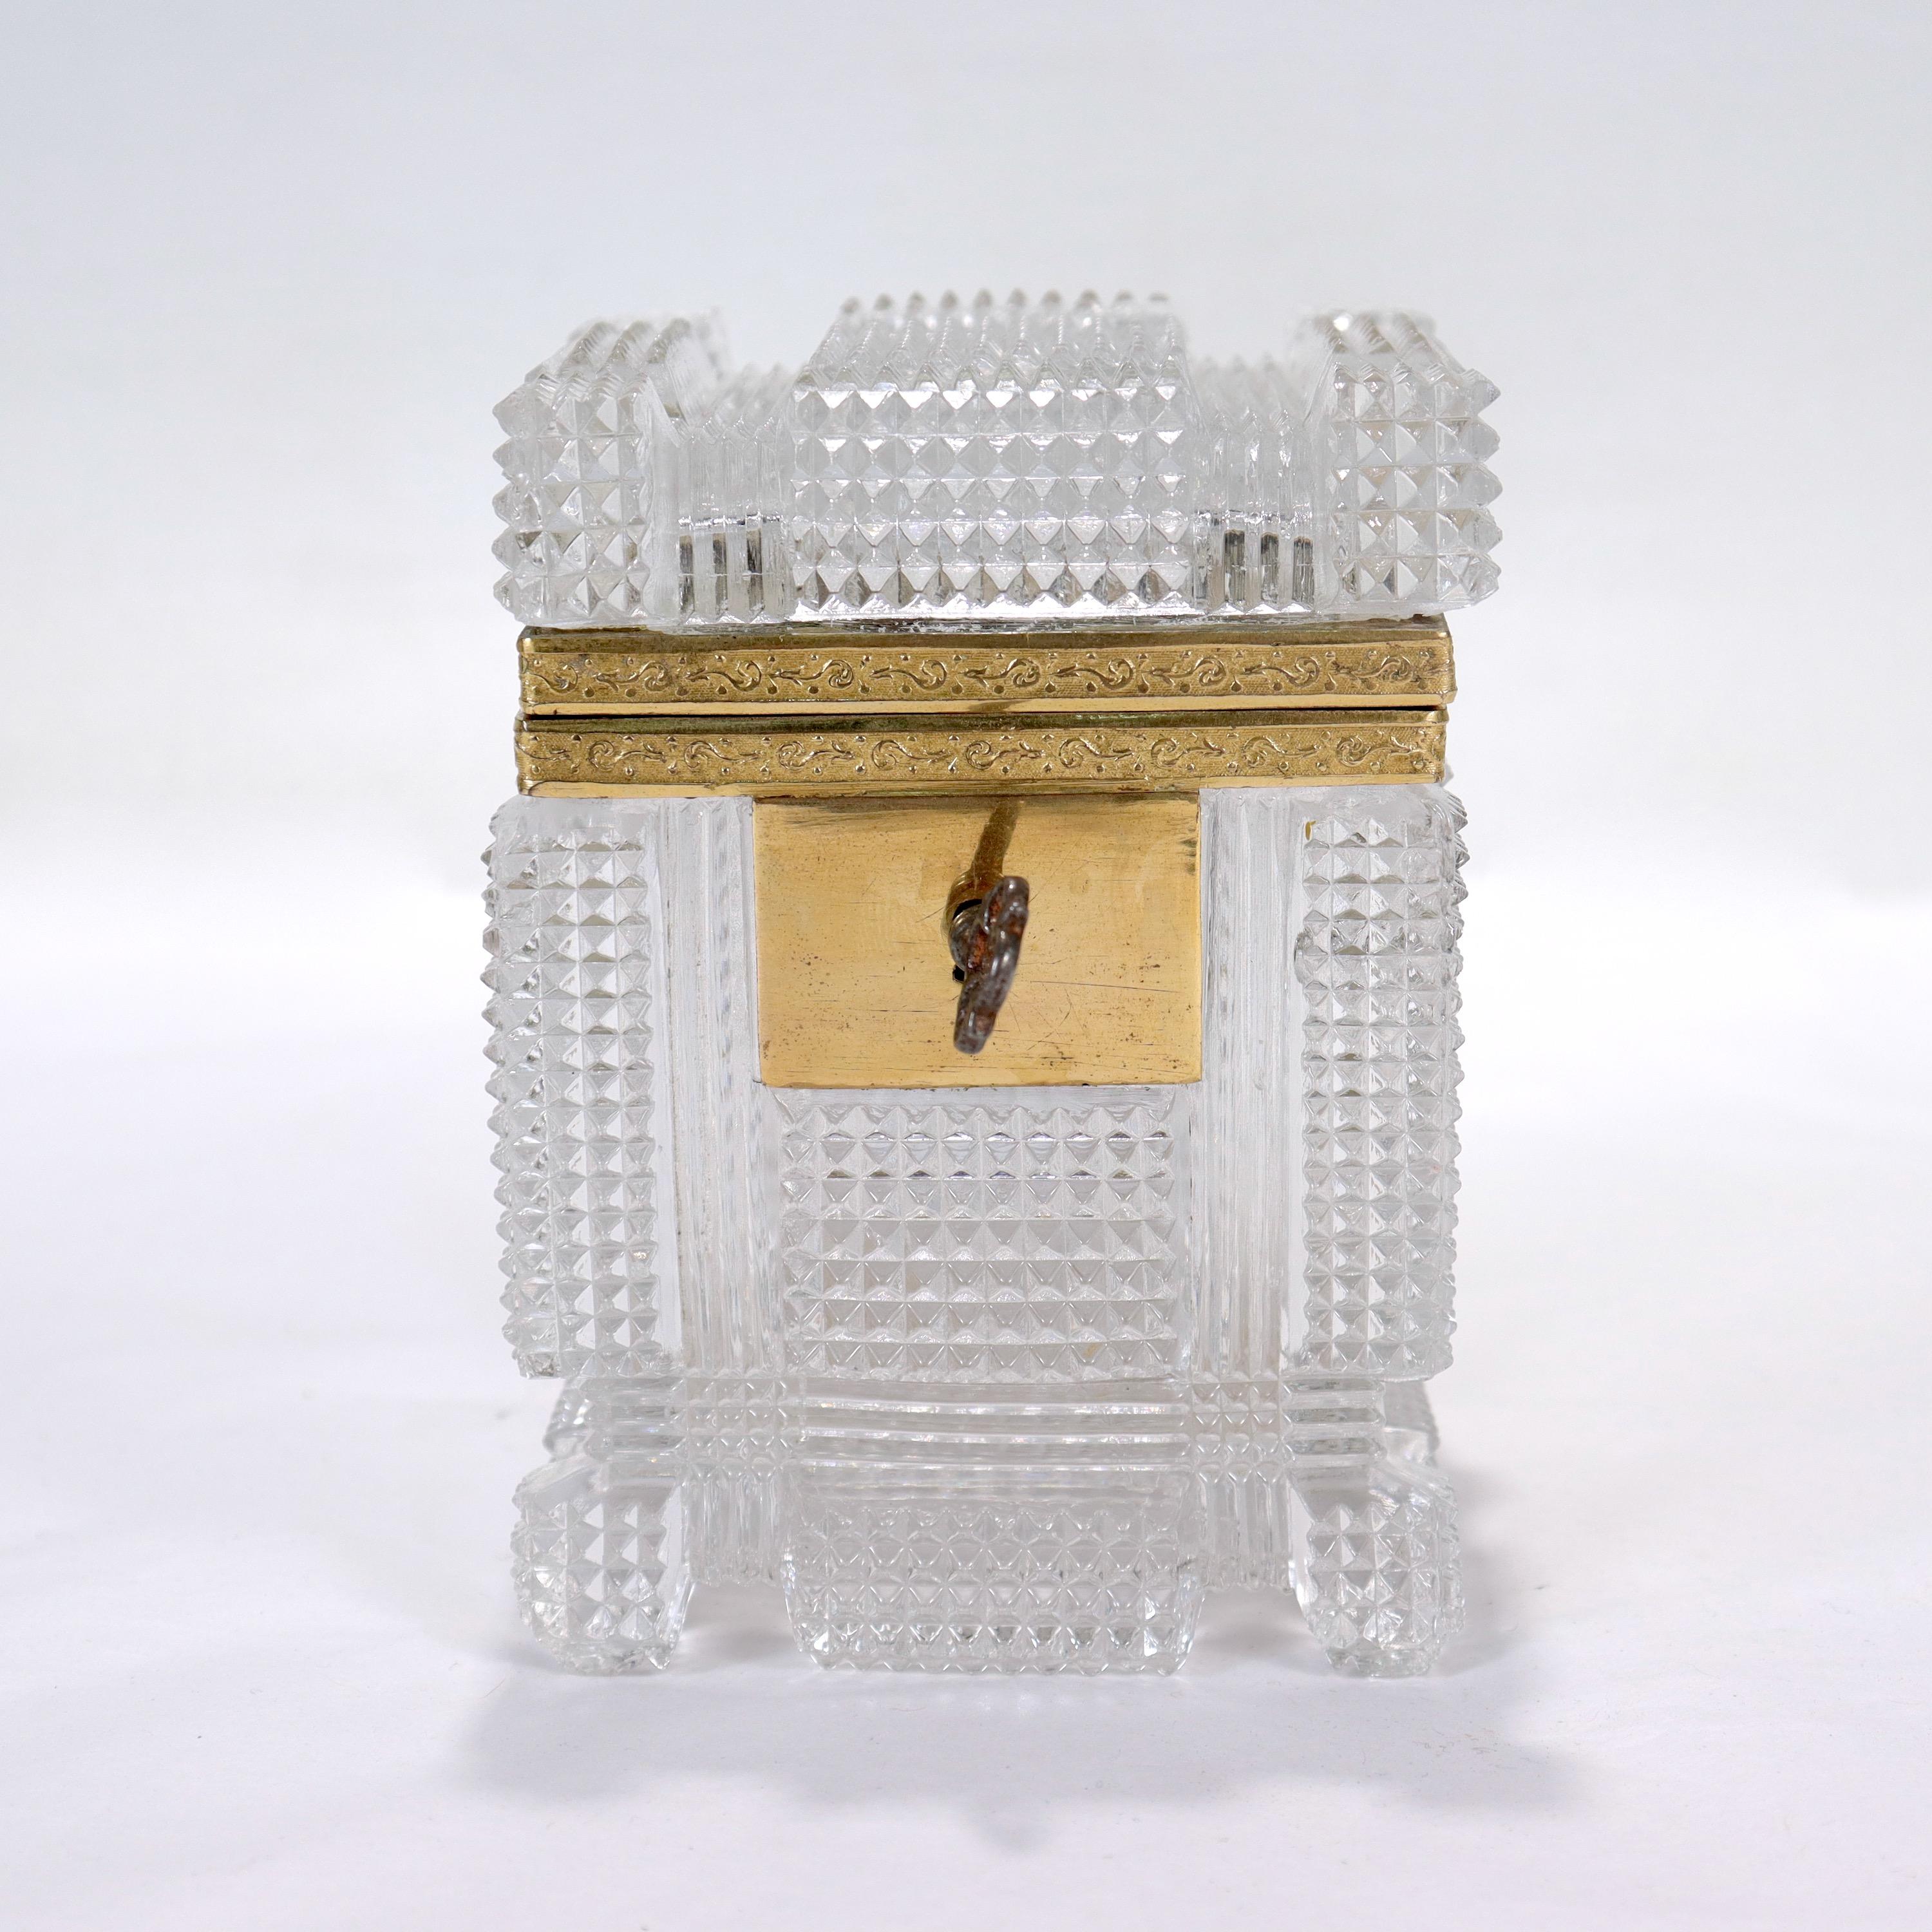 A fine antique French cut glass casket.

With a pressed and cut glass body and cover with a gilt bronze mount.

Together with an associated key for a nonfunctional lock.

Simply a great French cut glass casket!

Date:
Early 19th